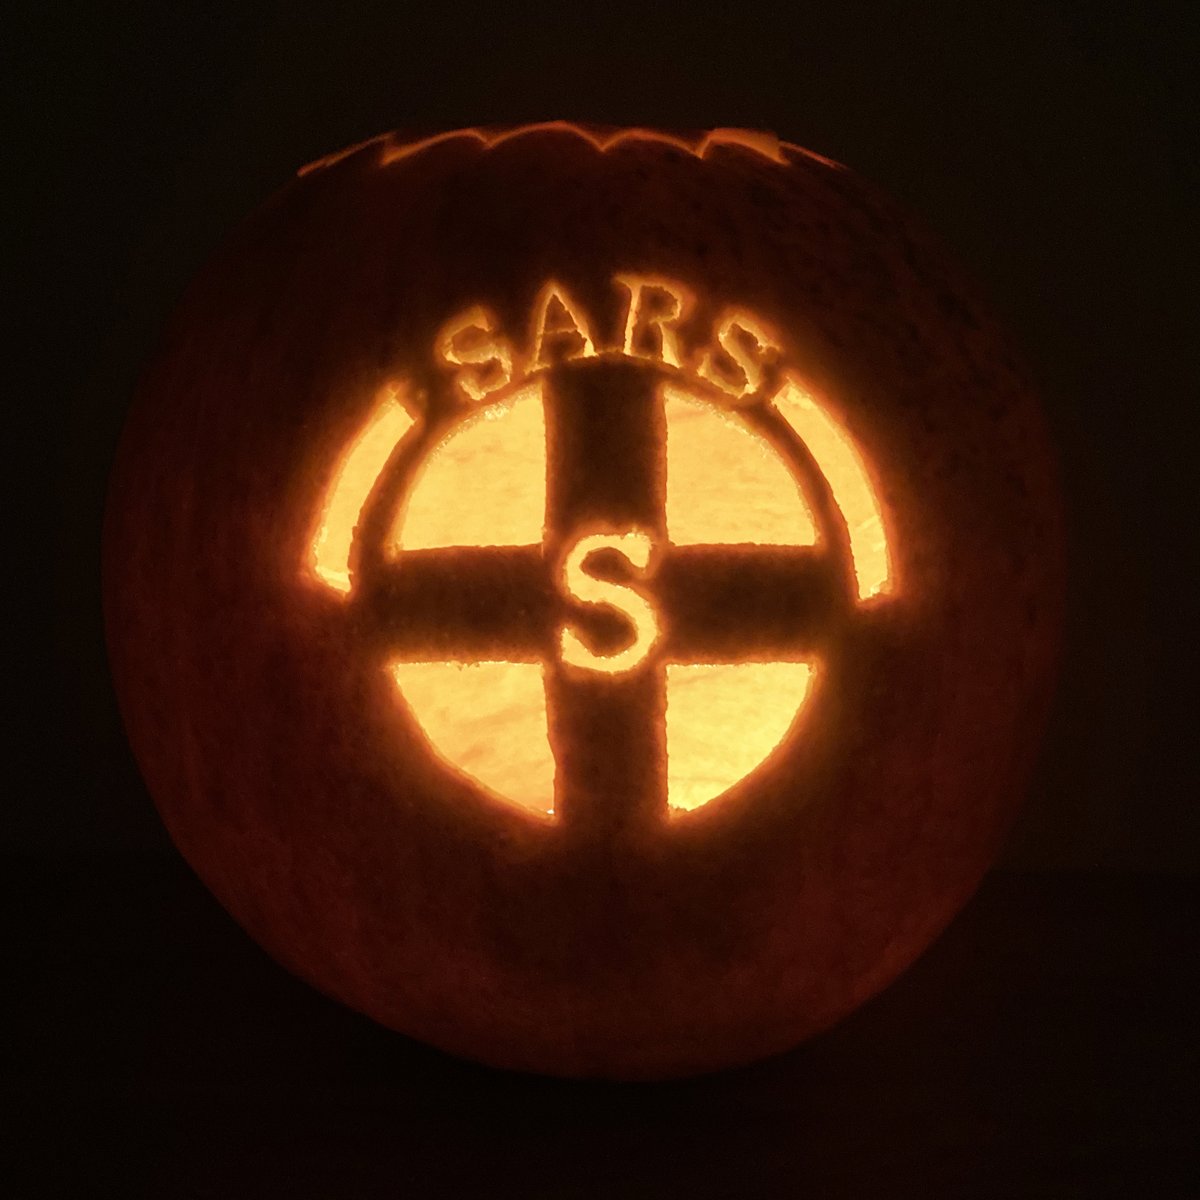 Huge thanks to #volunteer clinicians Andy, Jemma and Edwin for giving up their Halloween - keeping Suffolk safe from all the spooky stuff! 👻 Thanks also to patient Mark Youles for carving the fantastic SARS pumpkin 🎃 #takecare #savinglives #suffolk